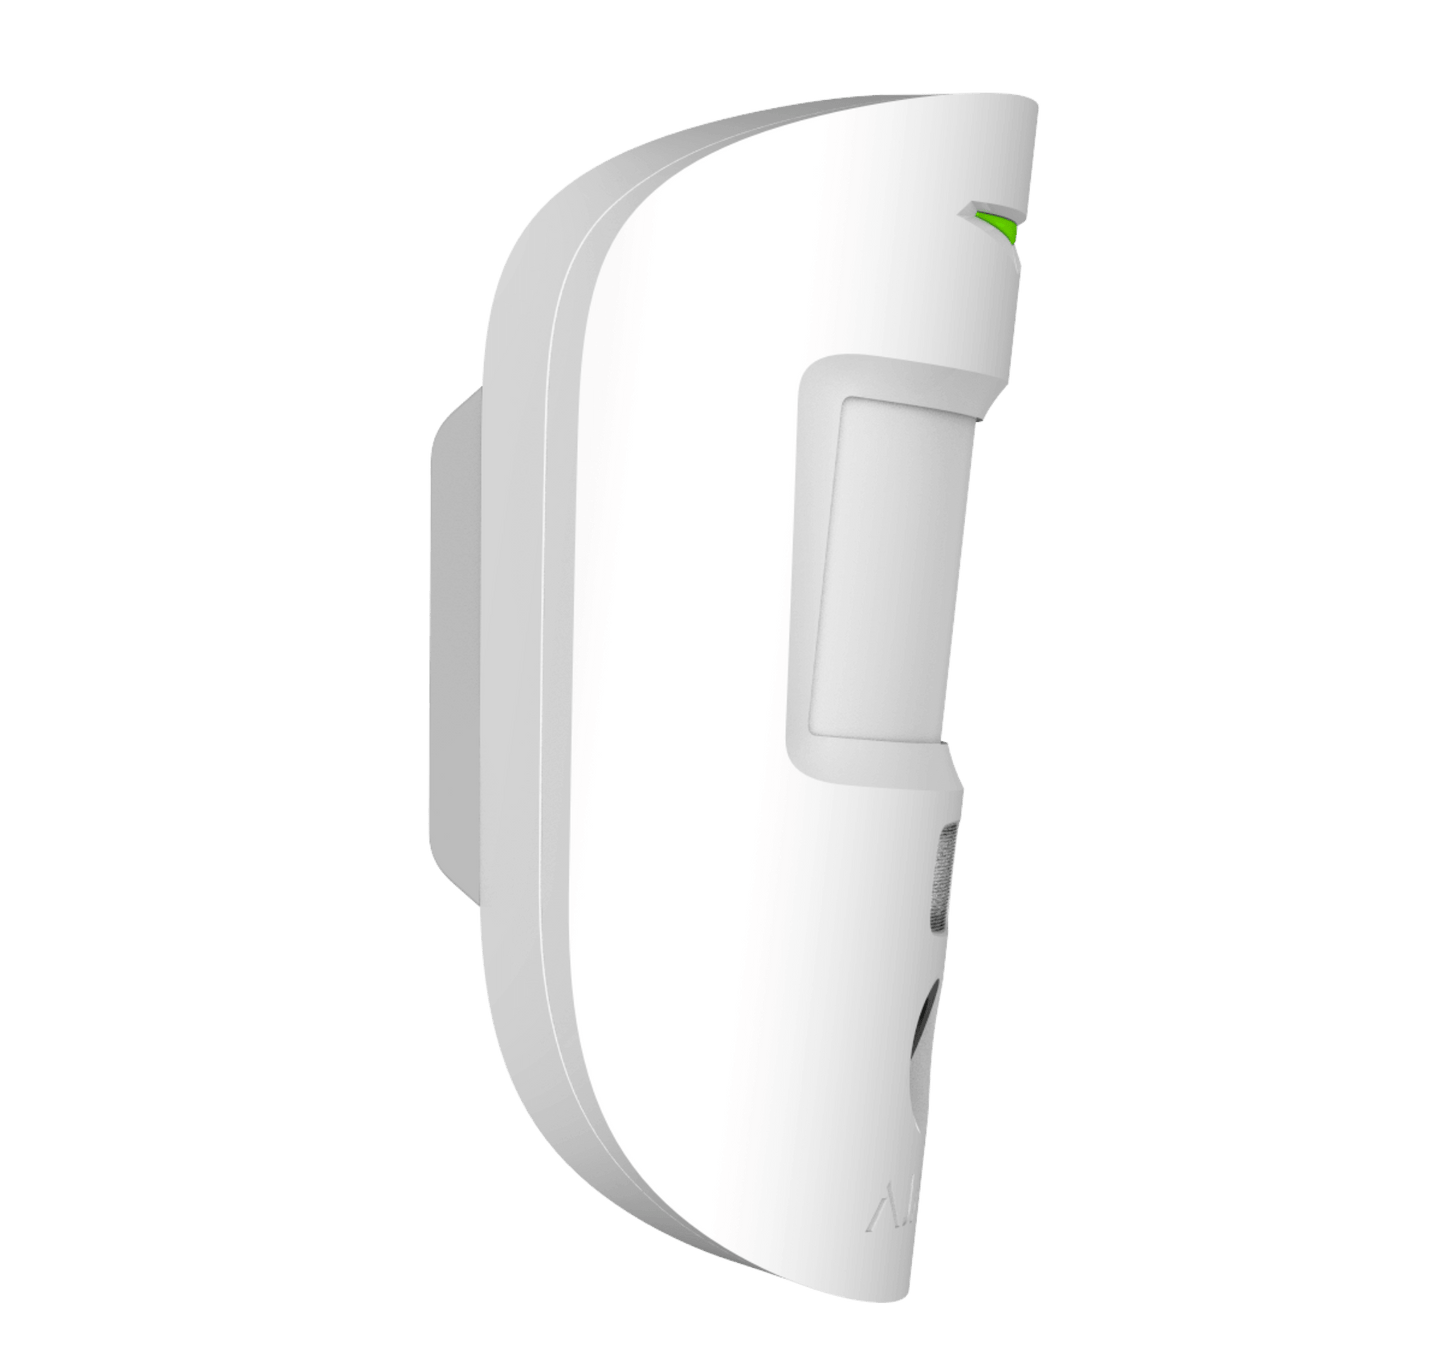 White Ajax MotionCam (PhoD) a wireless motion detector with a built in camera for home and business security, 110 × 65 × 50 mm in size, 86 grams in weight. side view of device